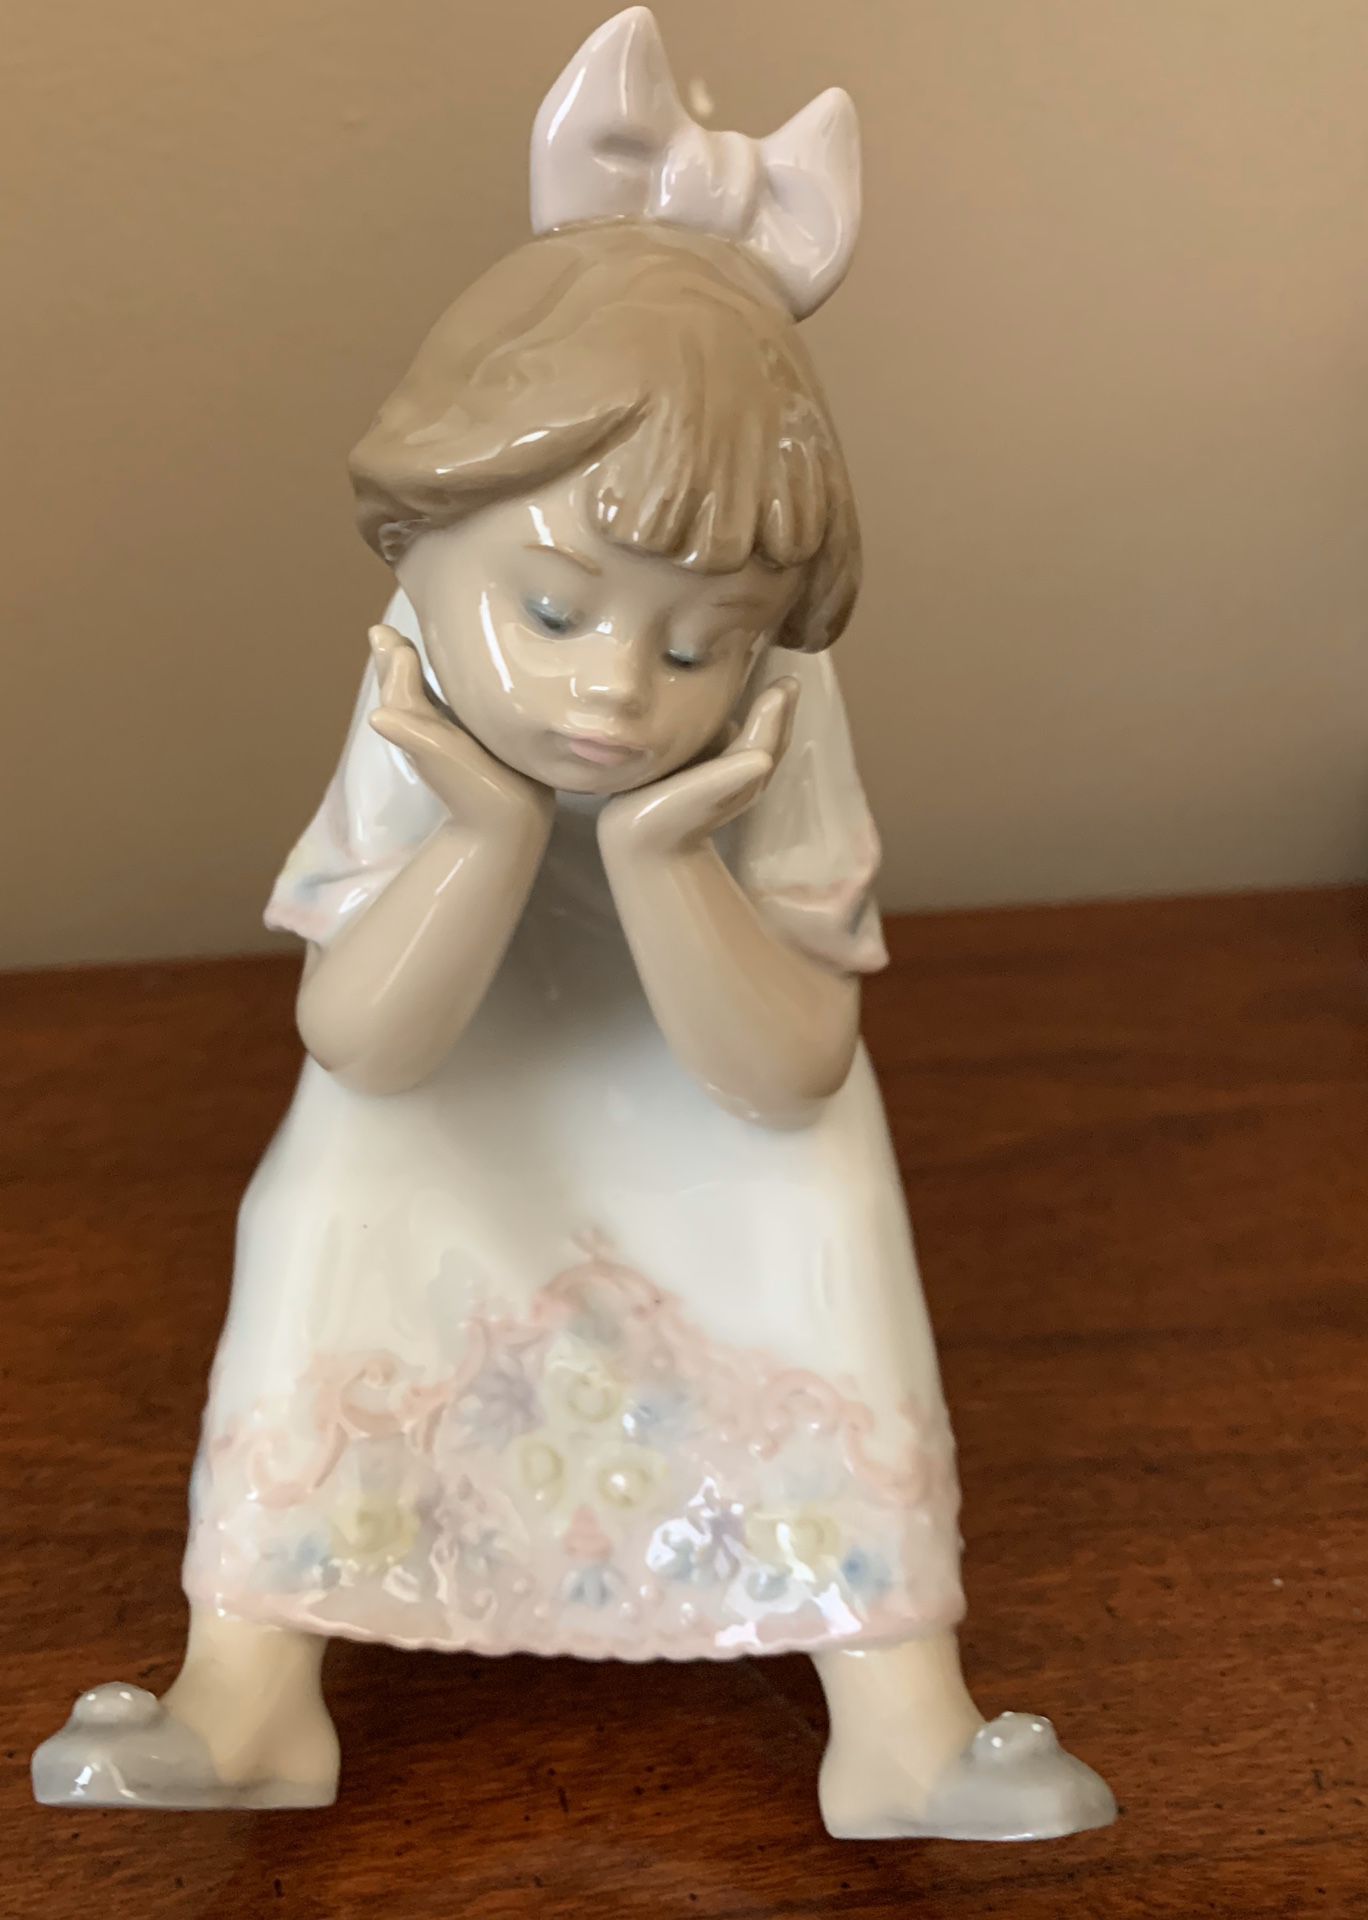 Lladro #5649 "Nothing to Do"—Retired Figurine, Girl on Stool